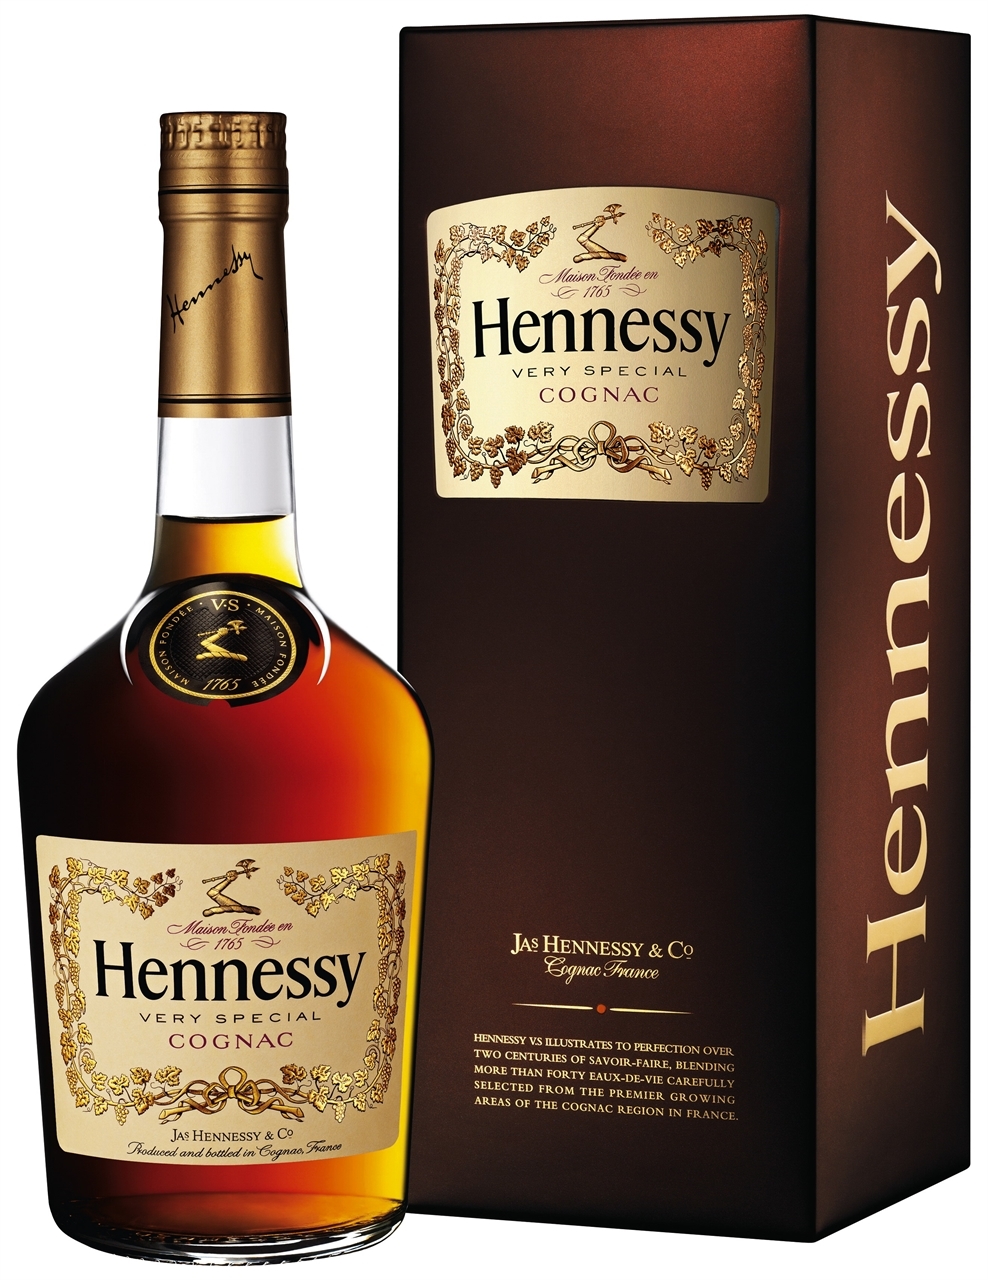 Hennessy: Whiskey Or Brandy? The Answer May Surprise You